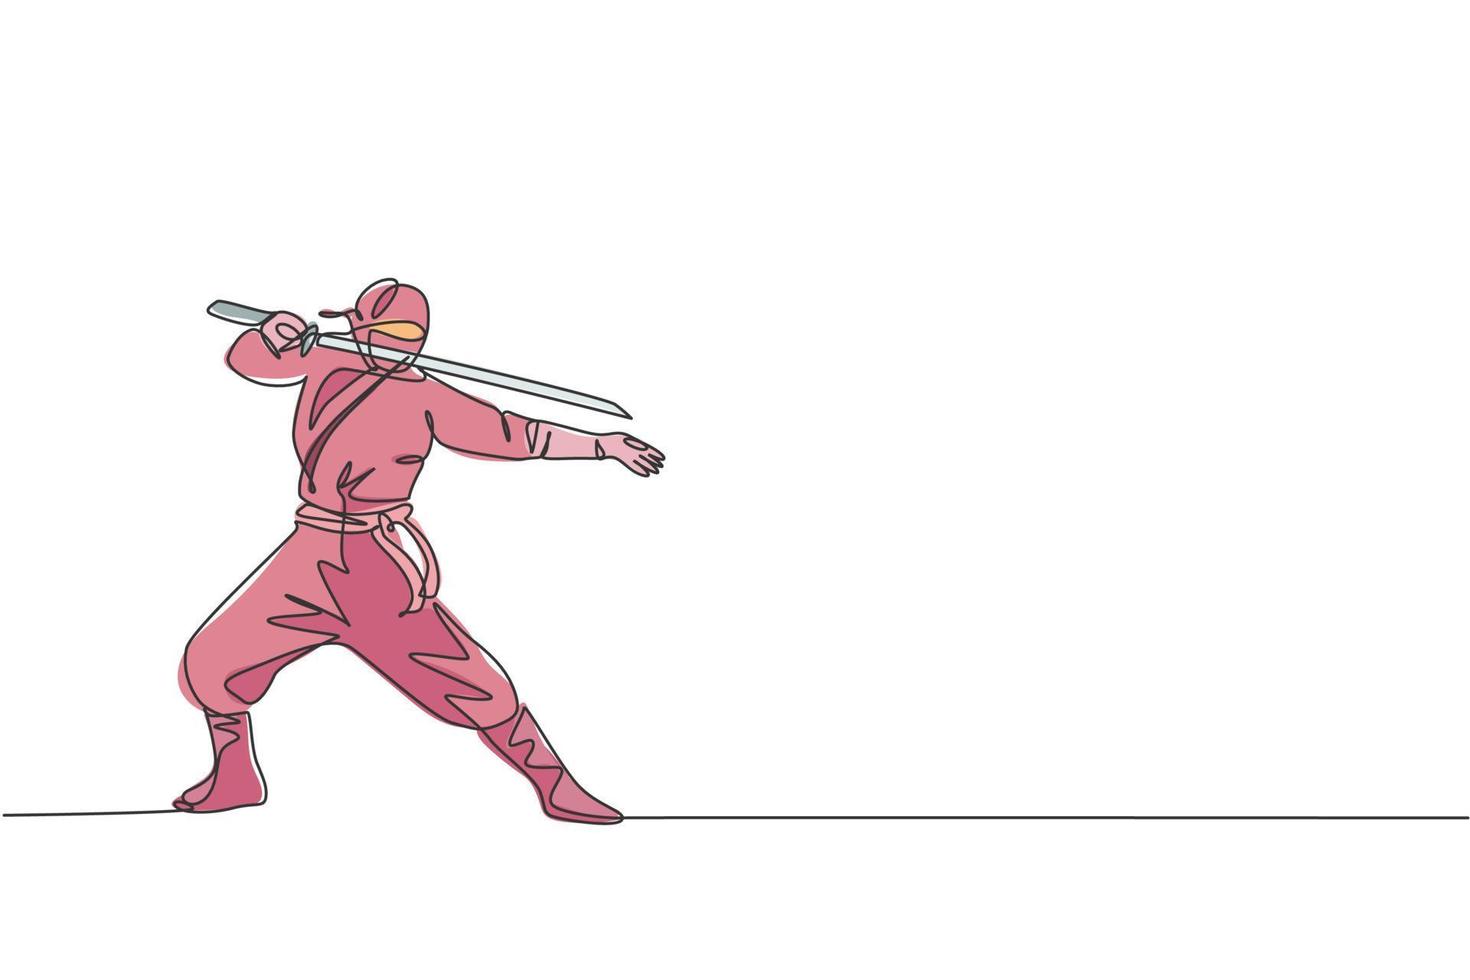 Single continuous line drawing of young Japanese culture ninja warrior on mask costume with attacking stance pose. Martial art fighting samurai concept. Trendy one line draw design vector illustration